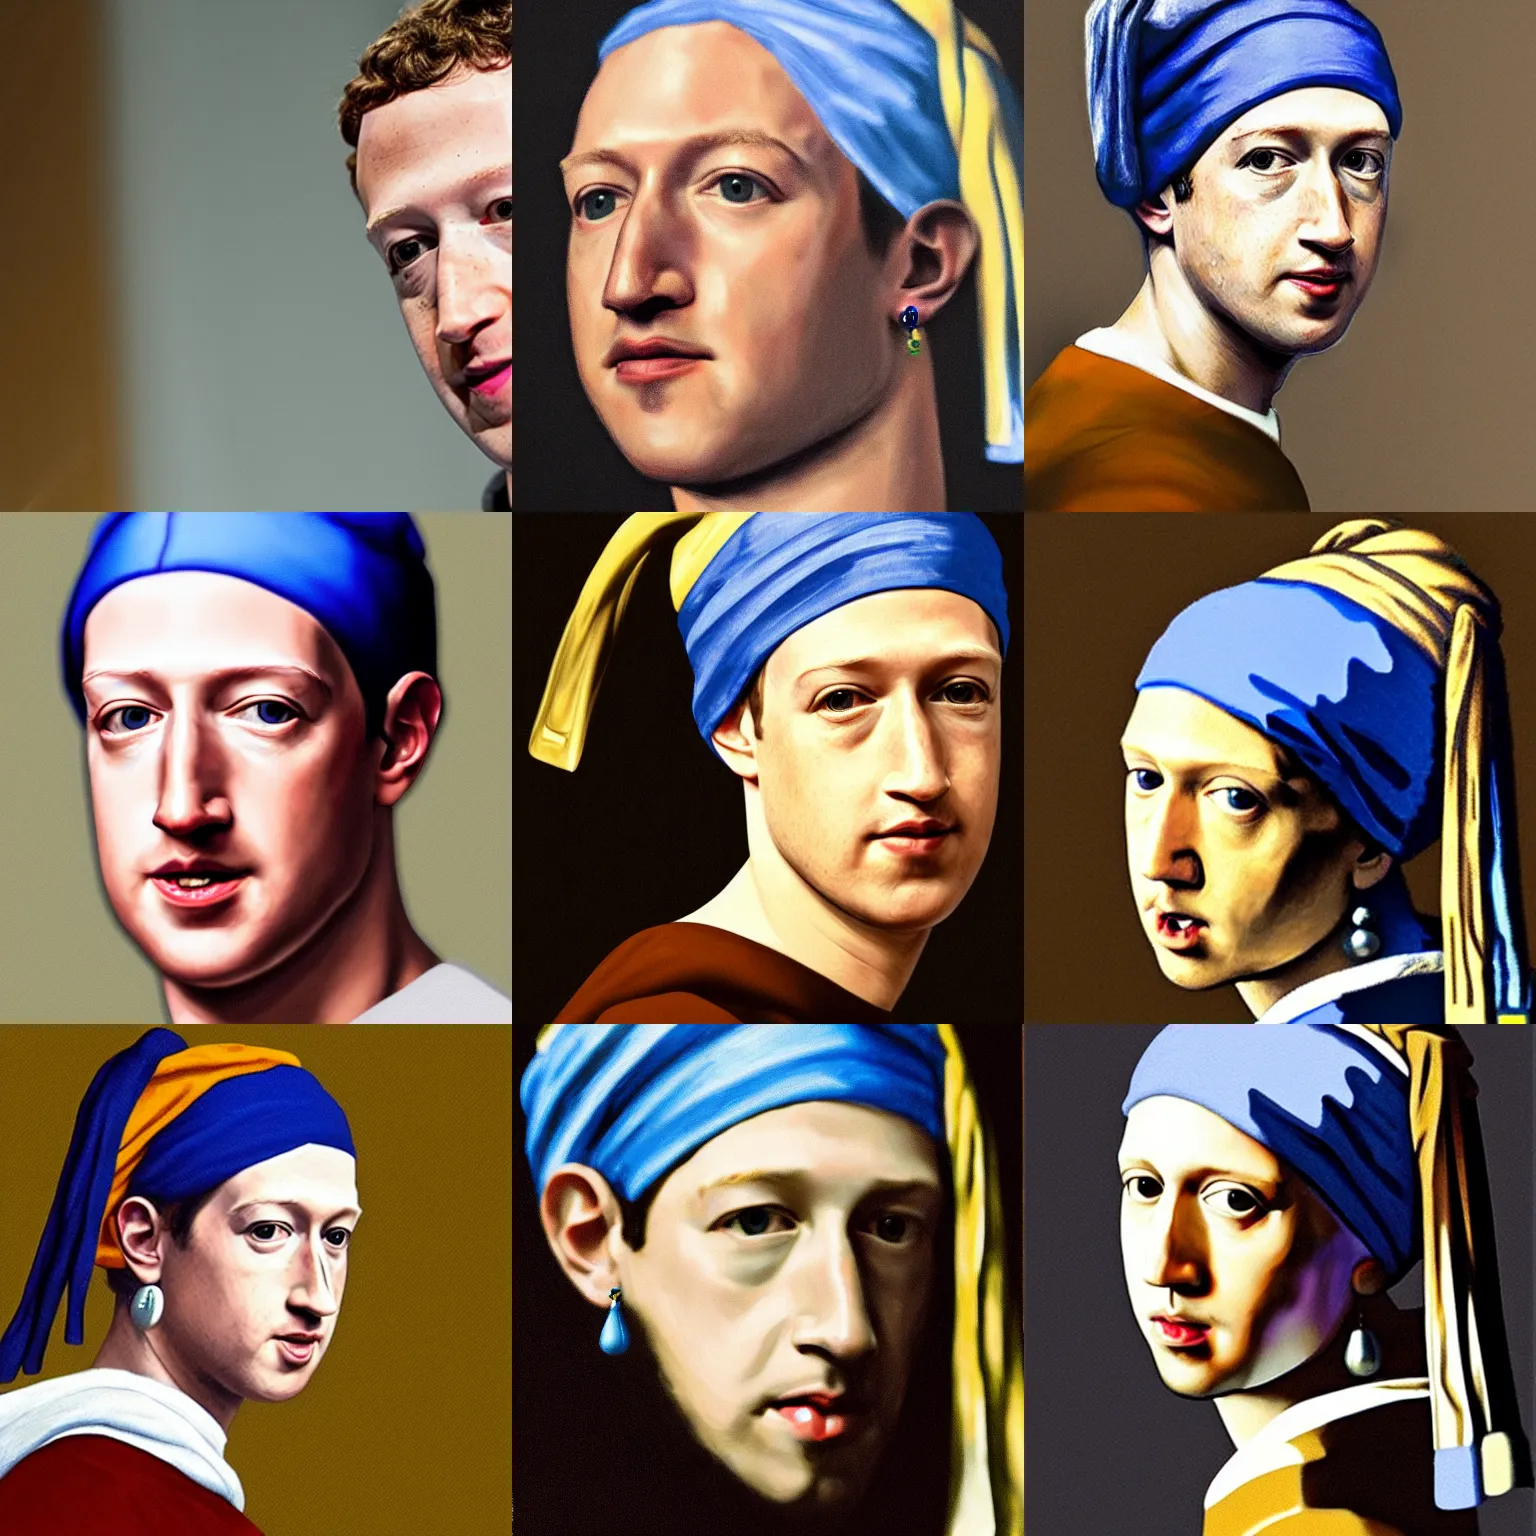 Prompt: Mark Zuckerberg with the Pearl earring